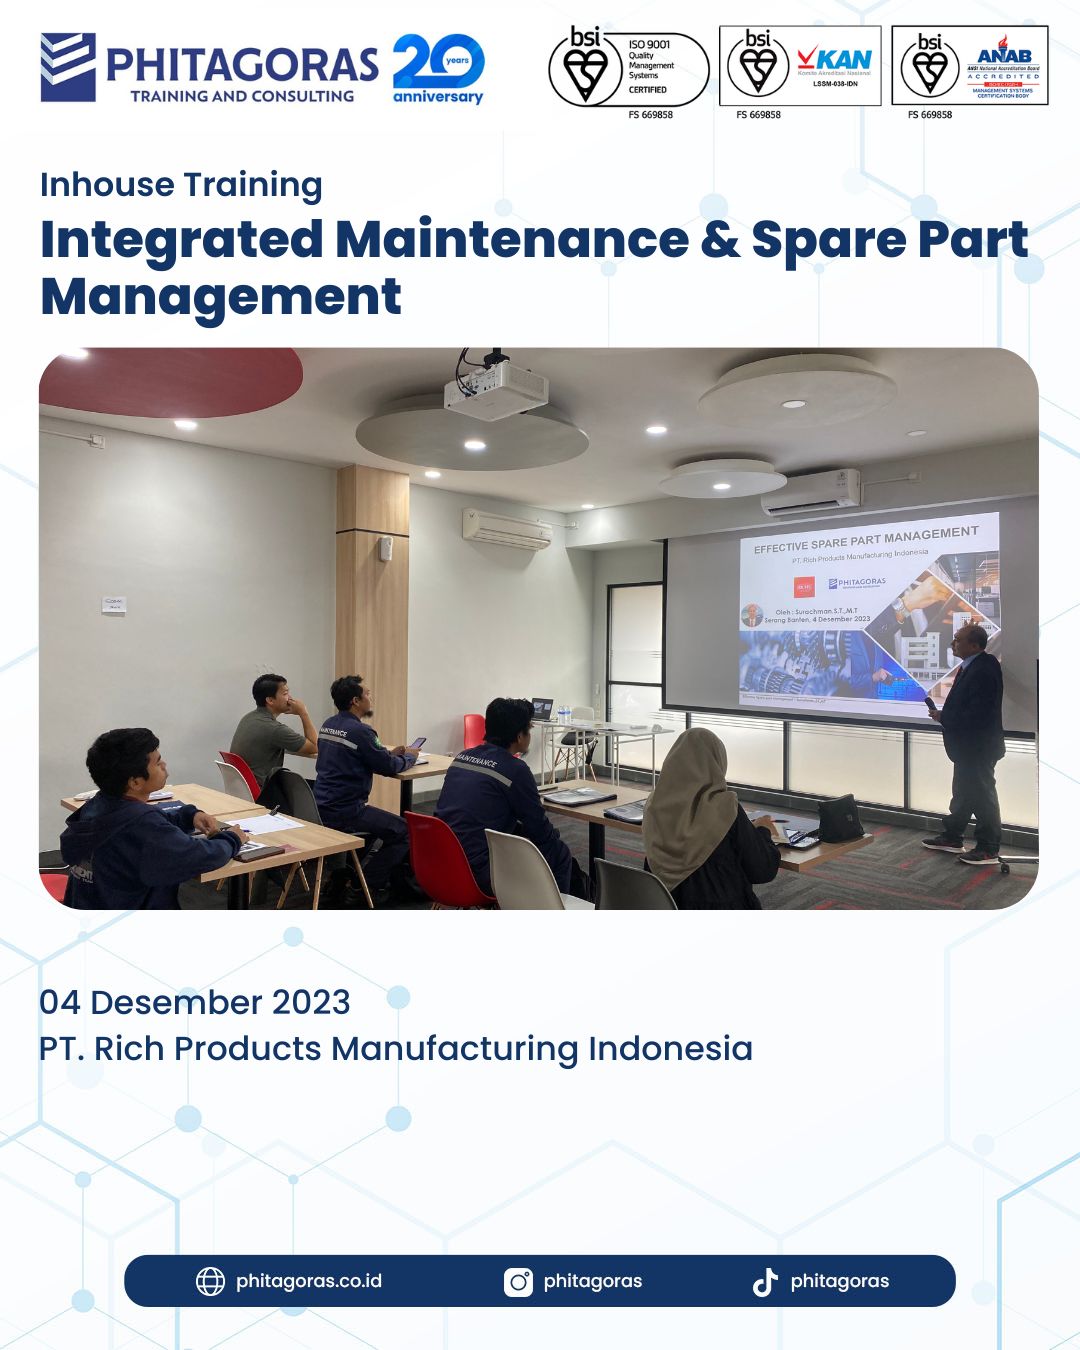 Inhouse Training Integrated Maintenance & Spare Part Management - PT. Rich Products Manufacturing Indonesia